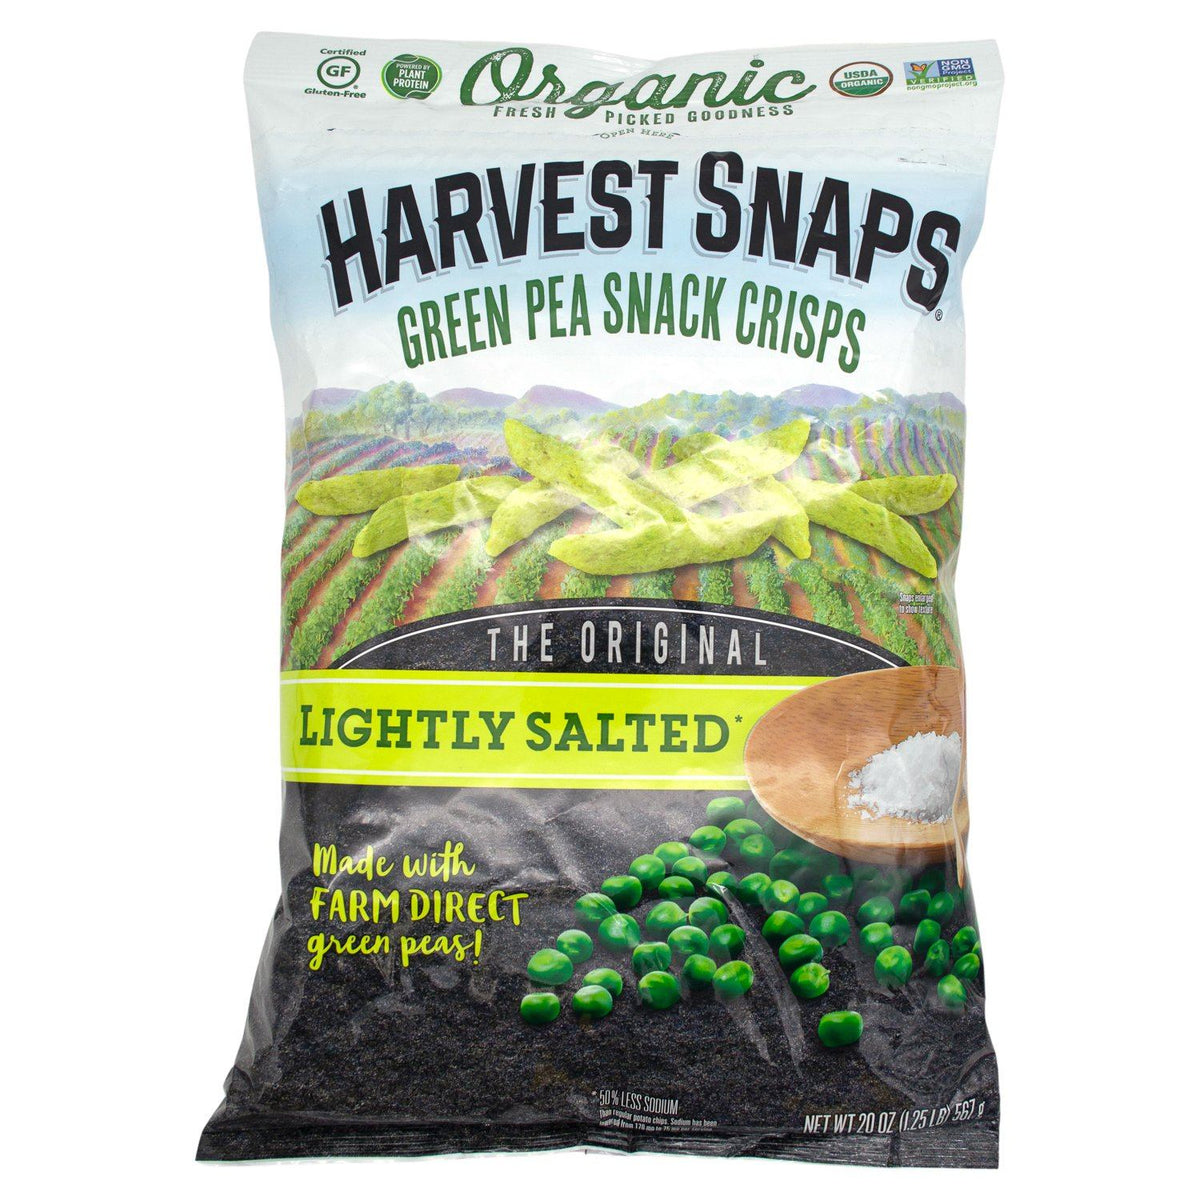 Harvest Snaps green pea snack snaps Reviews